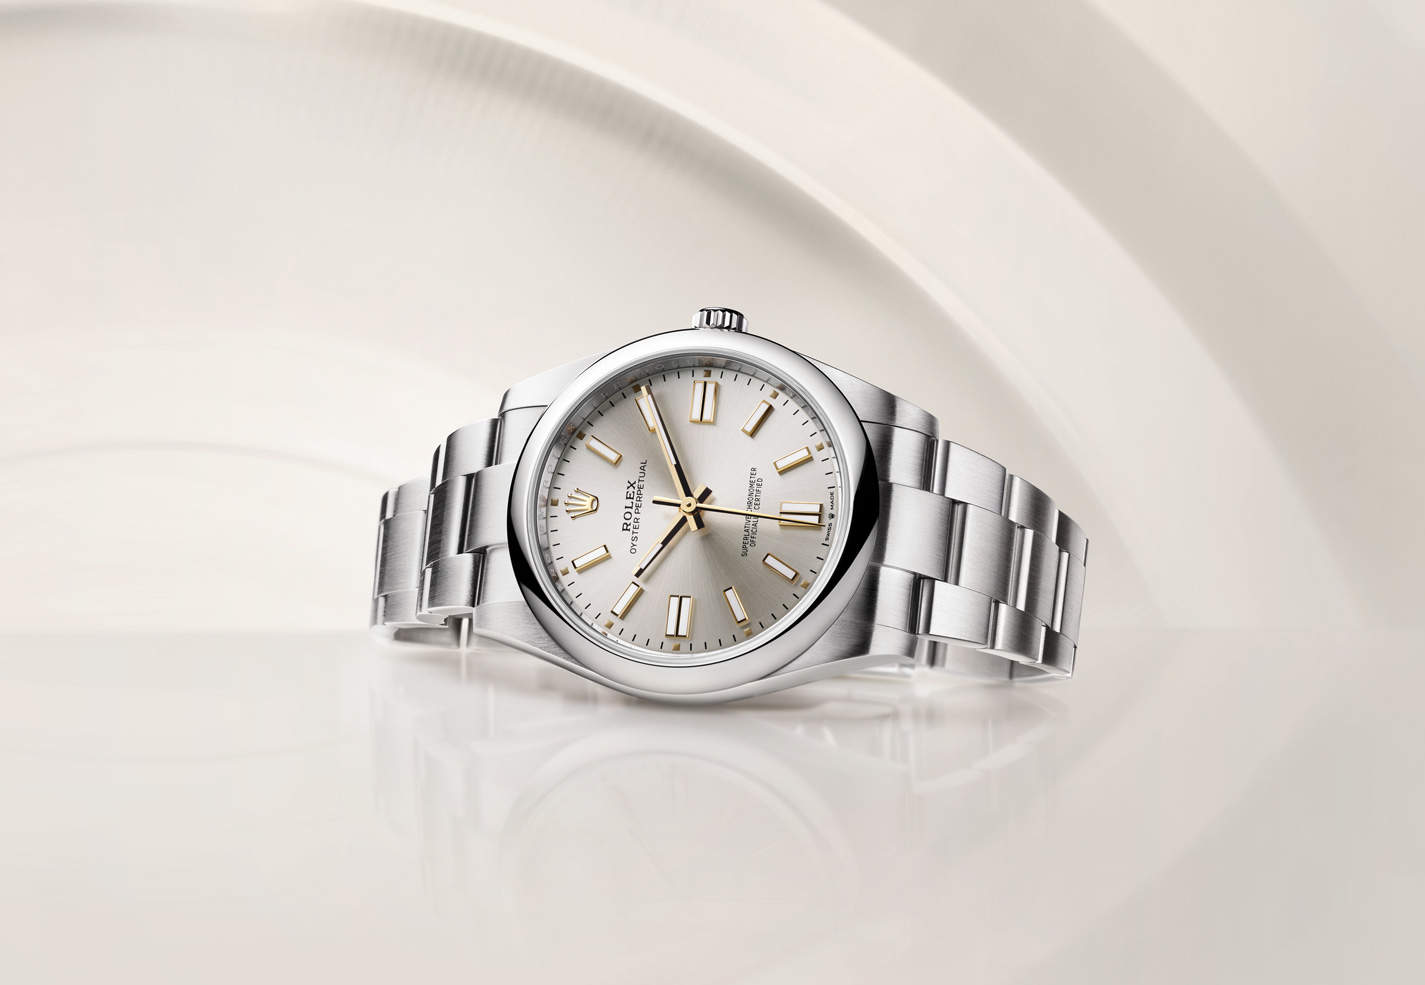 OYSTER PERPETUAL: L’ESSENZA DELL’OYSTER